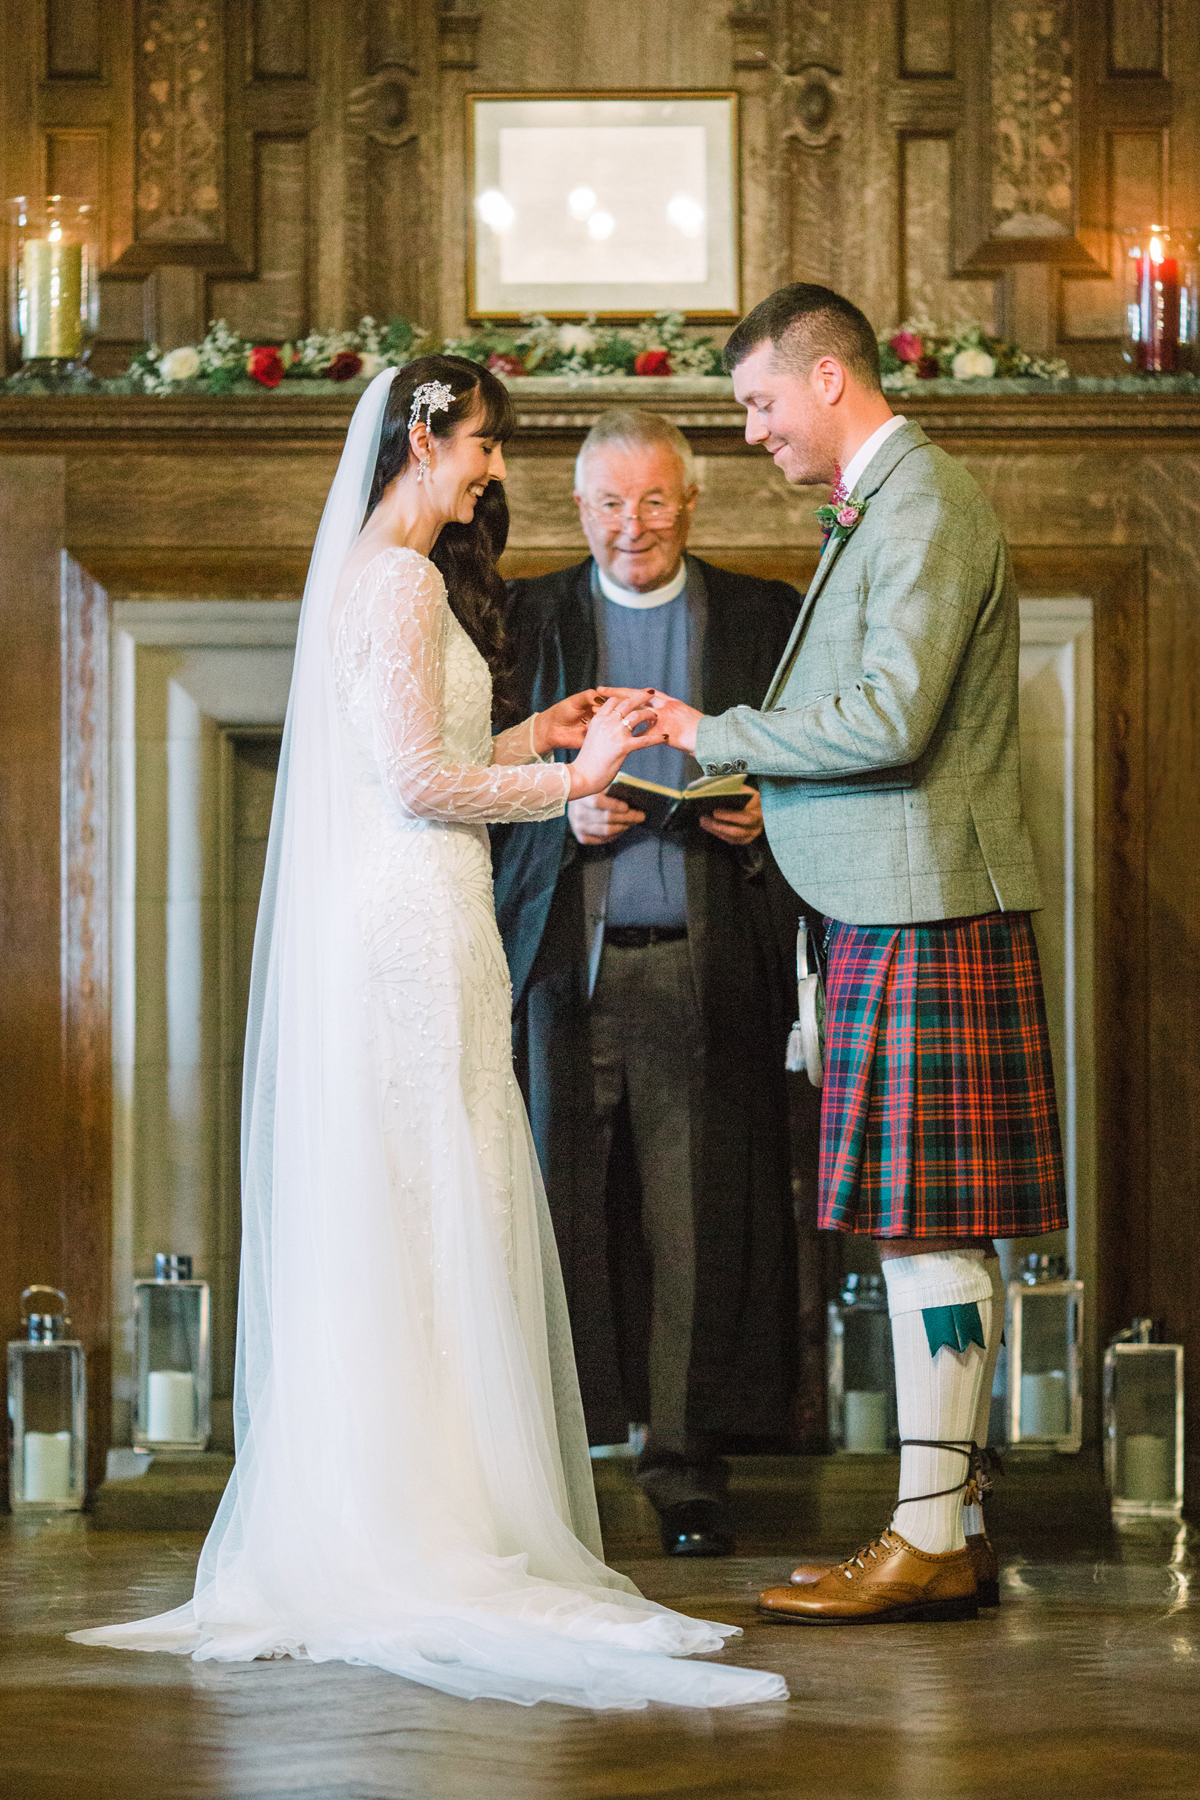 16 Bride and groom exchanging vows and rings at Rowallan Castle Scotland